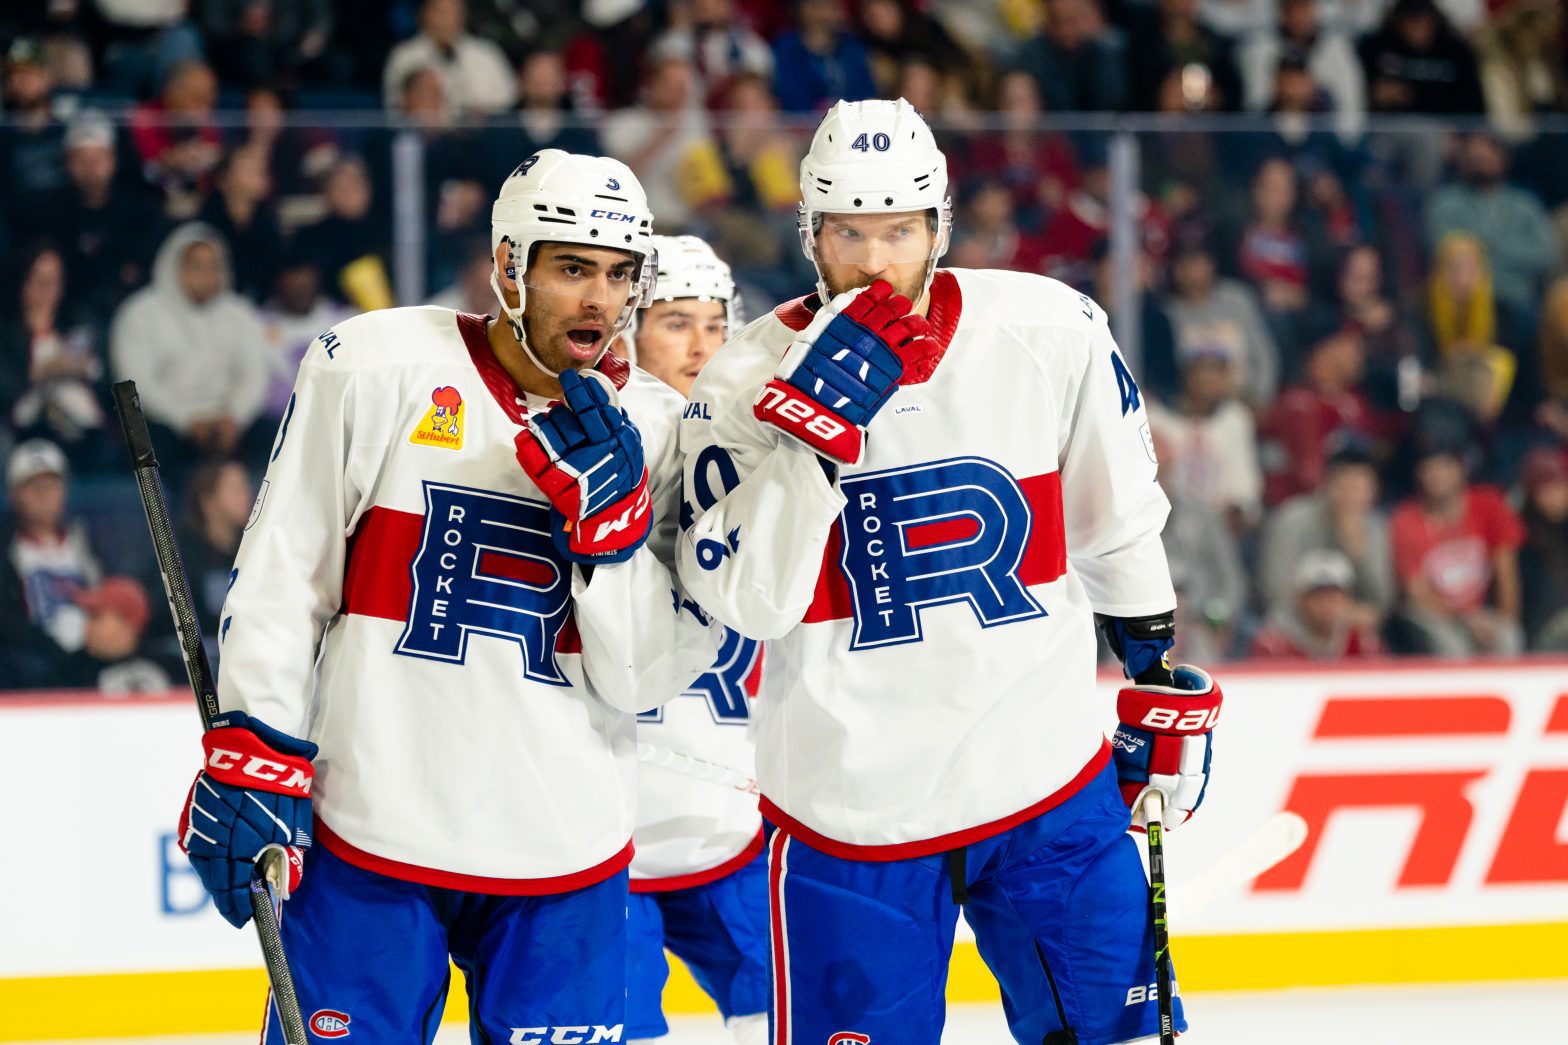 MORE Obstacles for the Laval Rocket! Can They Overcome The Odds